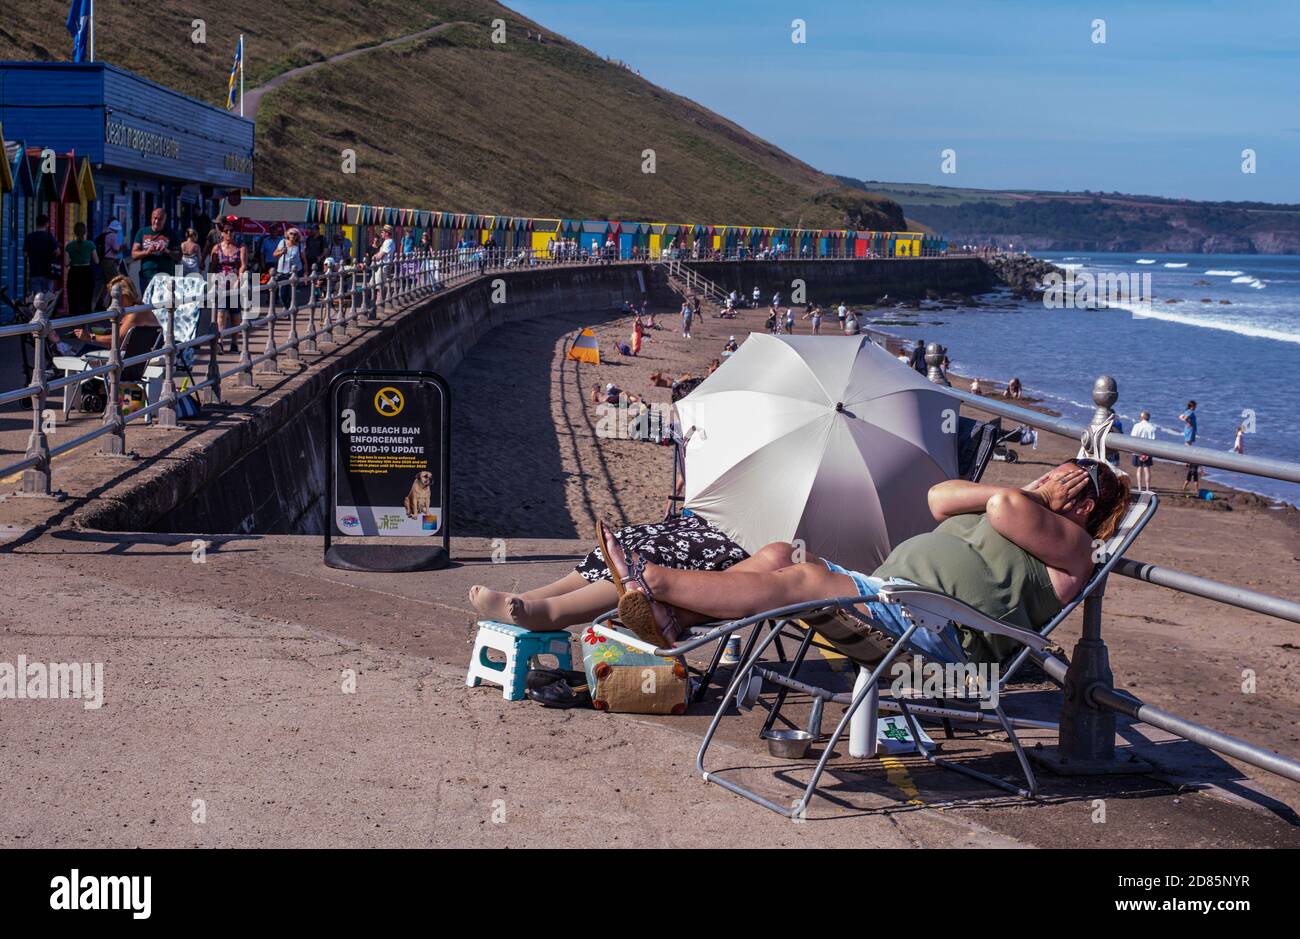 Woman relaxing on sun lounger by beach, Whitby, England, UK Stock Photo